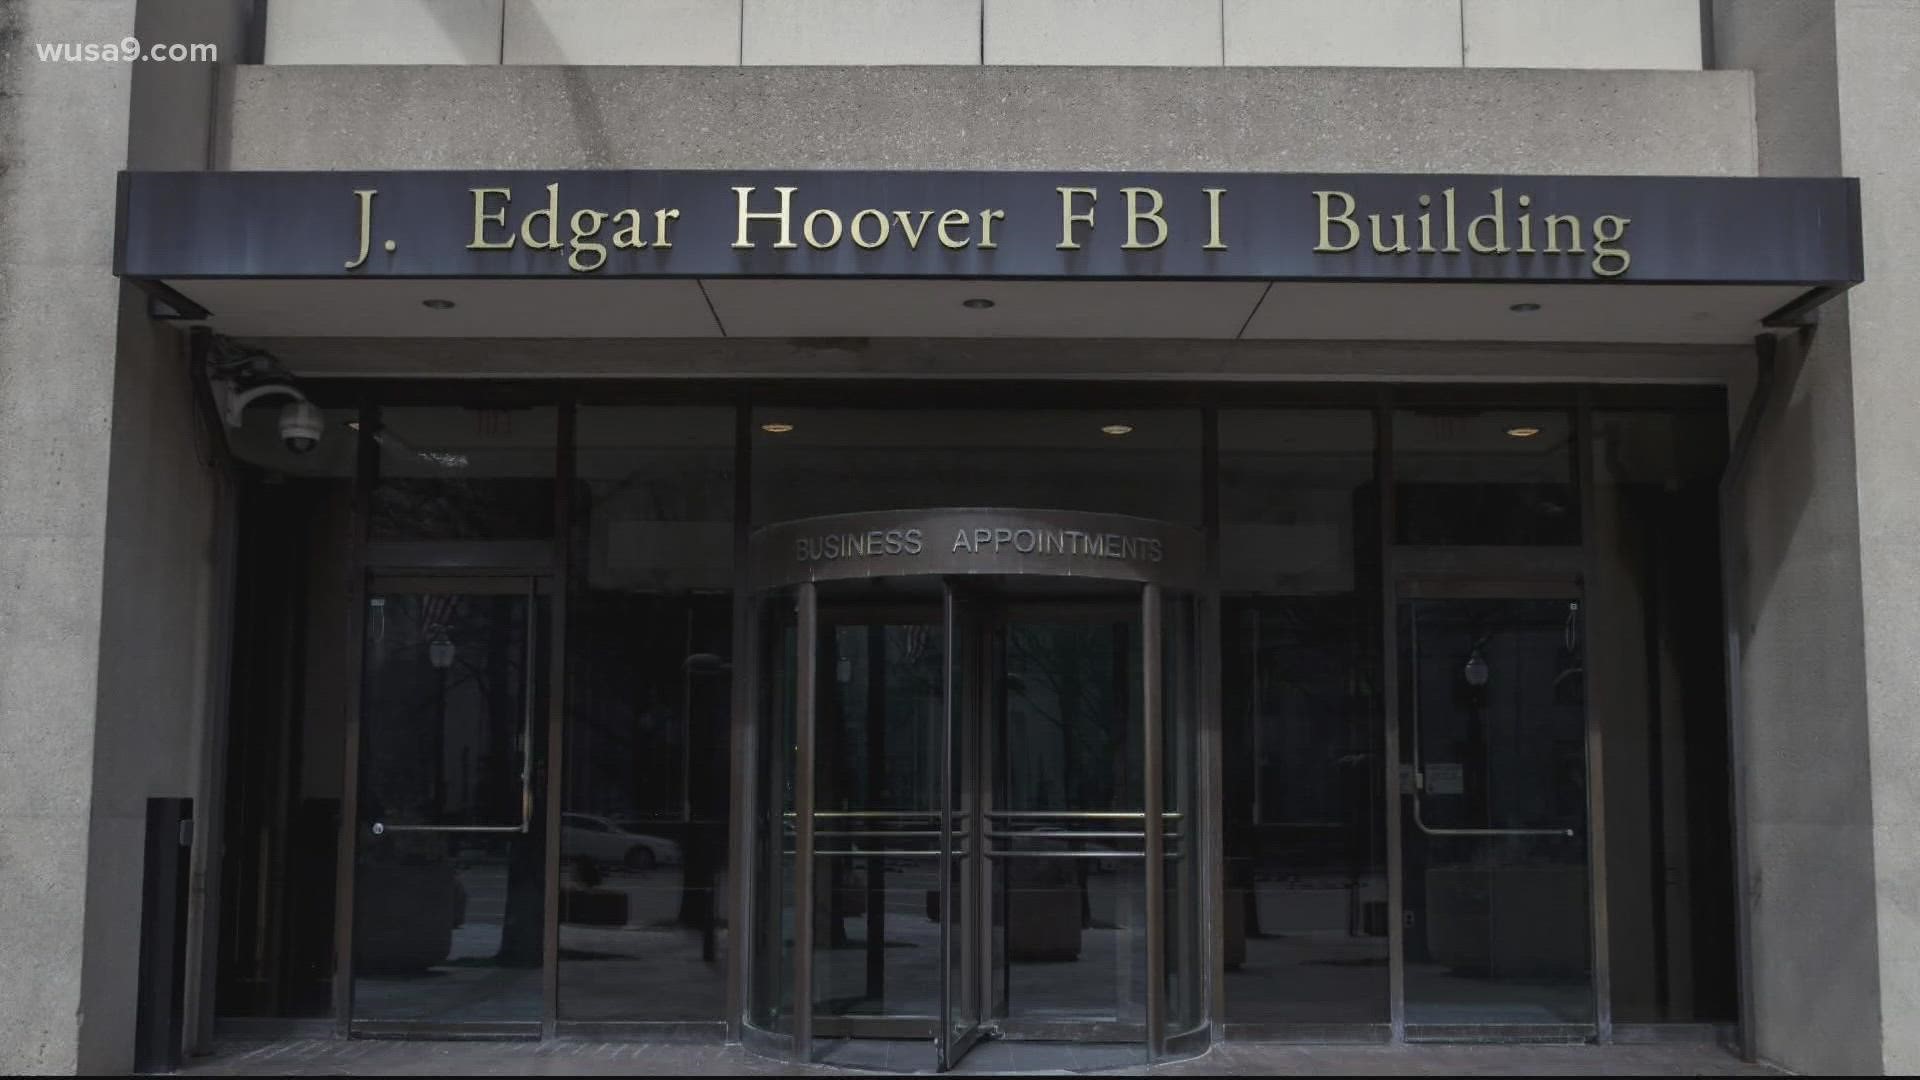 Local leaders in Maryland and Virginia are applauding a decision to move the FBI headquarters to the suburbs. The Trump administration had moved to keep it in D.C.